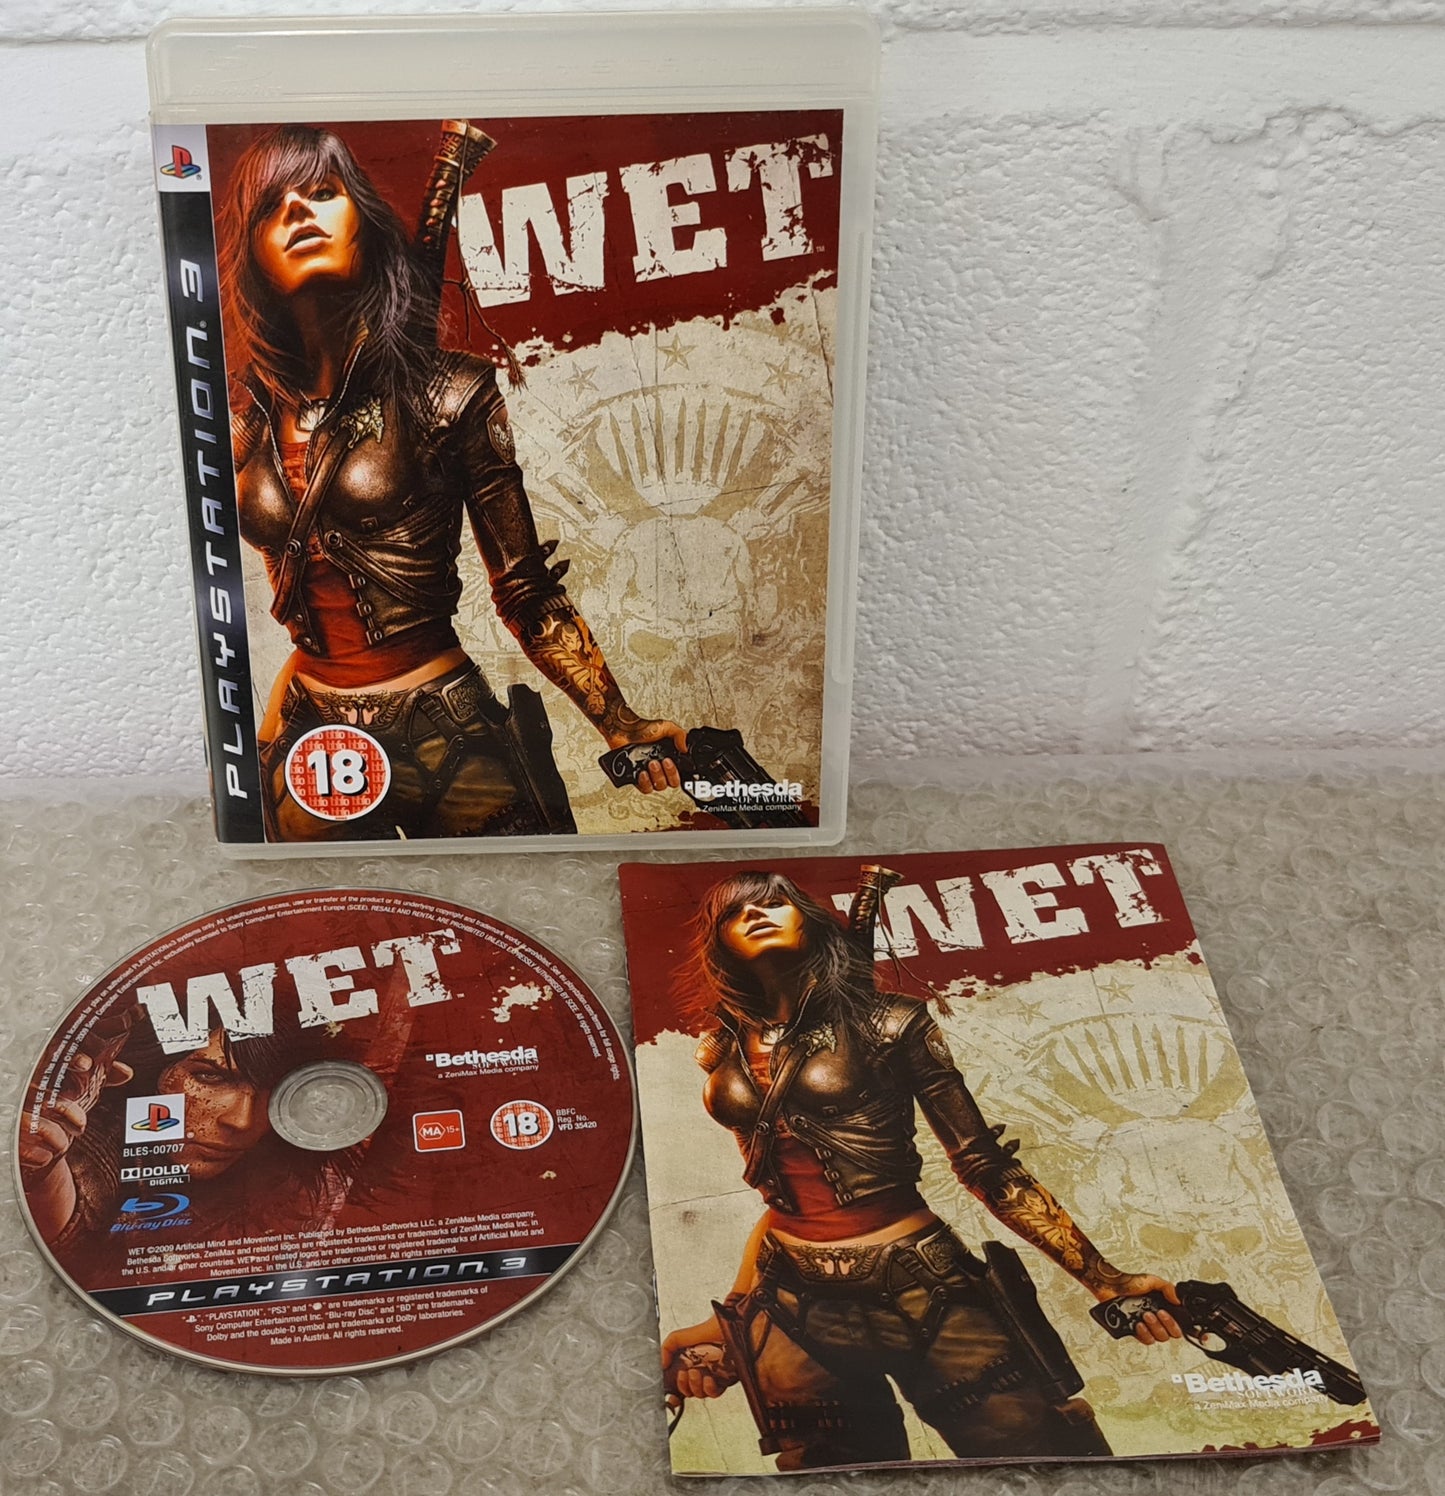 Wet Sony Playstation 3 (PS3) Game